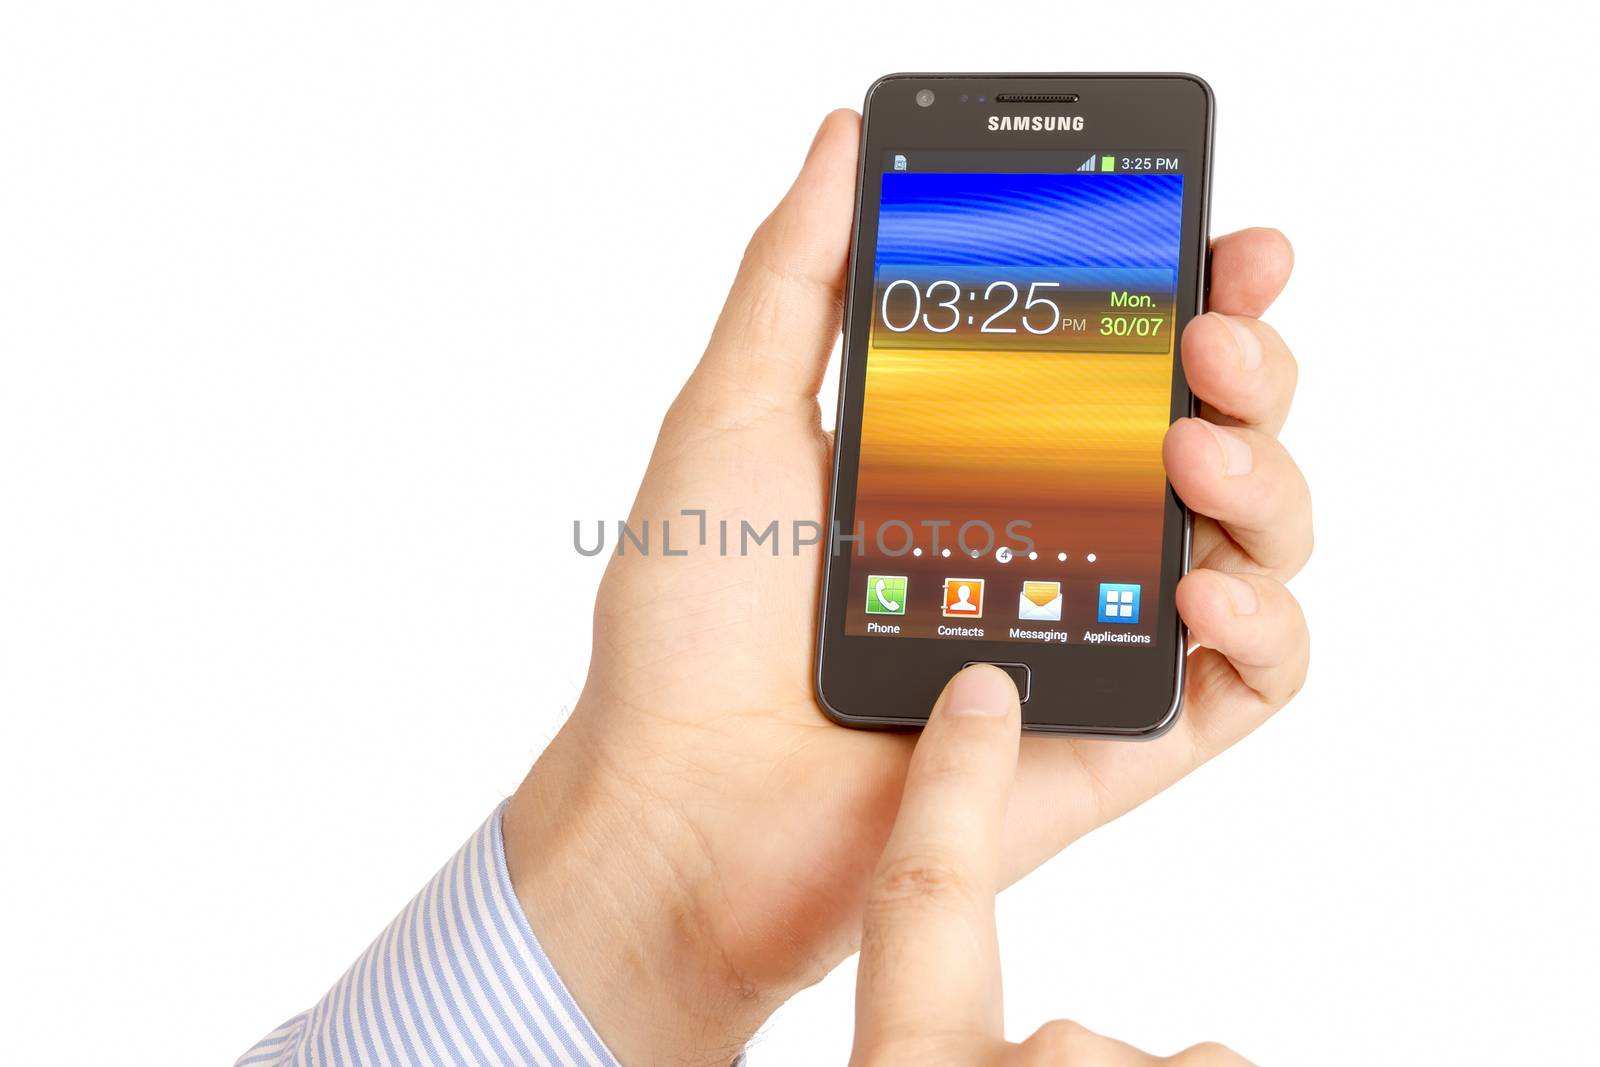 Galati, Romania – July 30, 2012: Hand holding the Samsung Galaxy S2. Samsung Galaxy S2 who has been sold in more than 20 million copies worldwide. Samsungs phone run the latest version of Android, Ice Cream Sandwich, the mobile operating system created by Google.